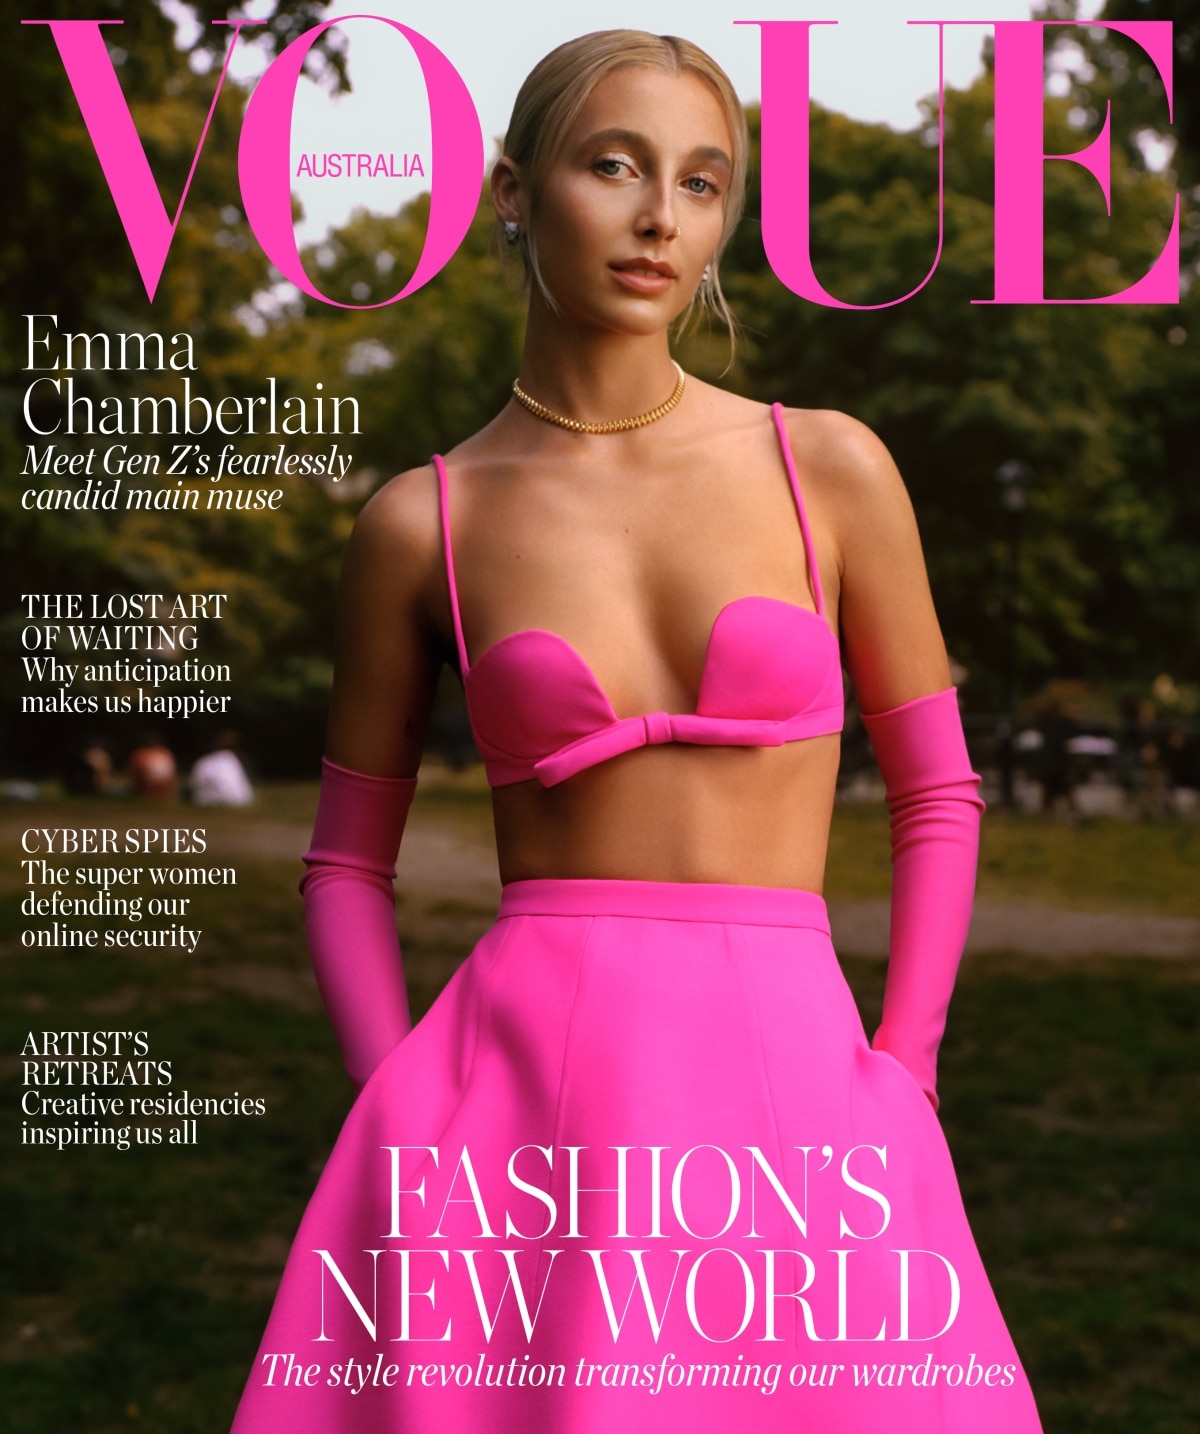 emma chamberlain: the real meaning of influence – a magazine